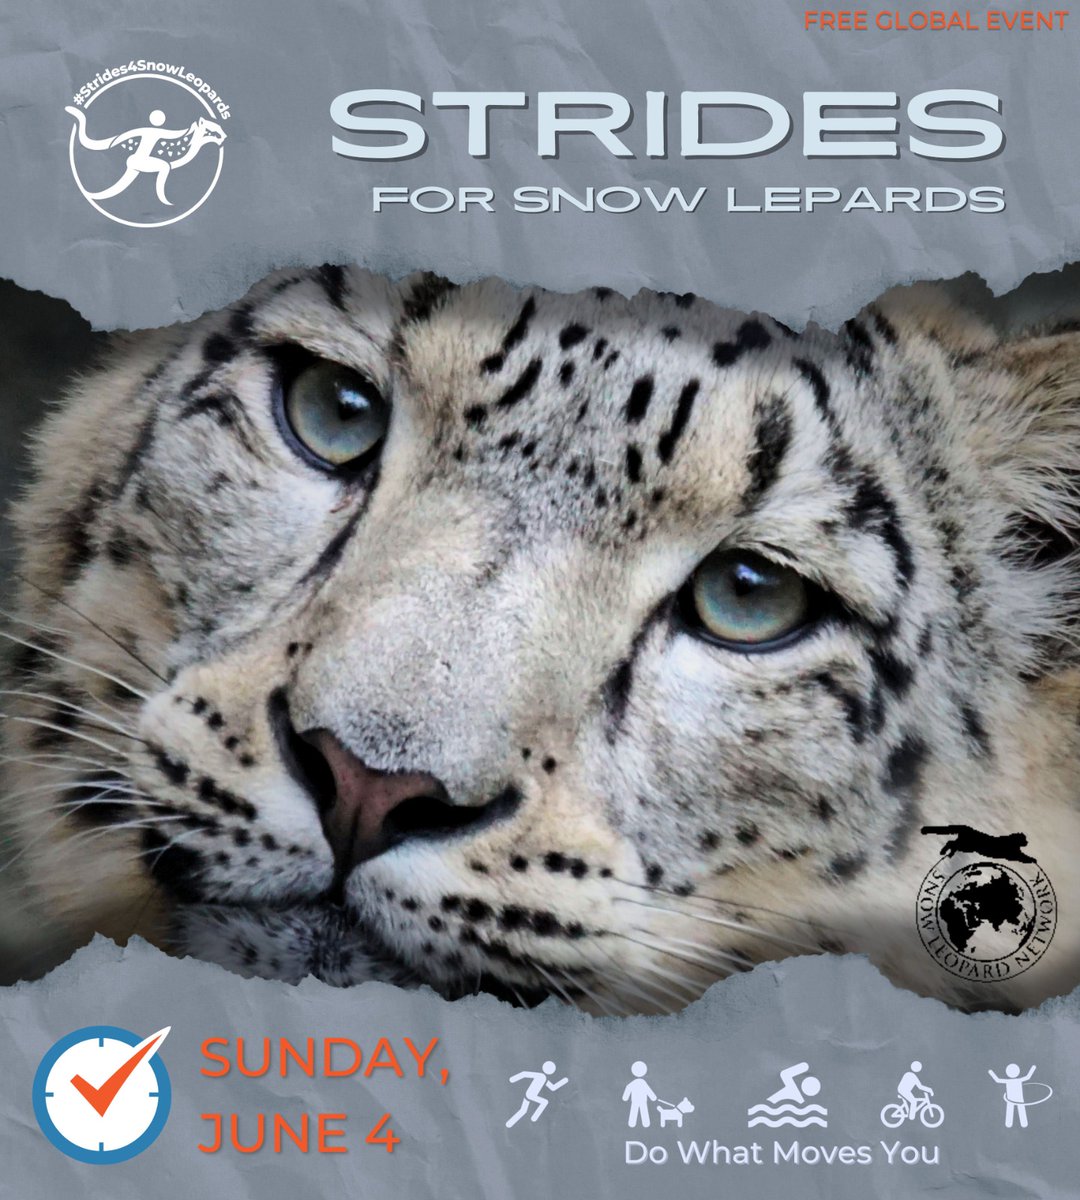 It's tomorrow  🙌  Join the Movement
 
#Strides4SnowLeopards #ClimateAwareness